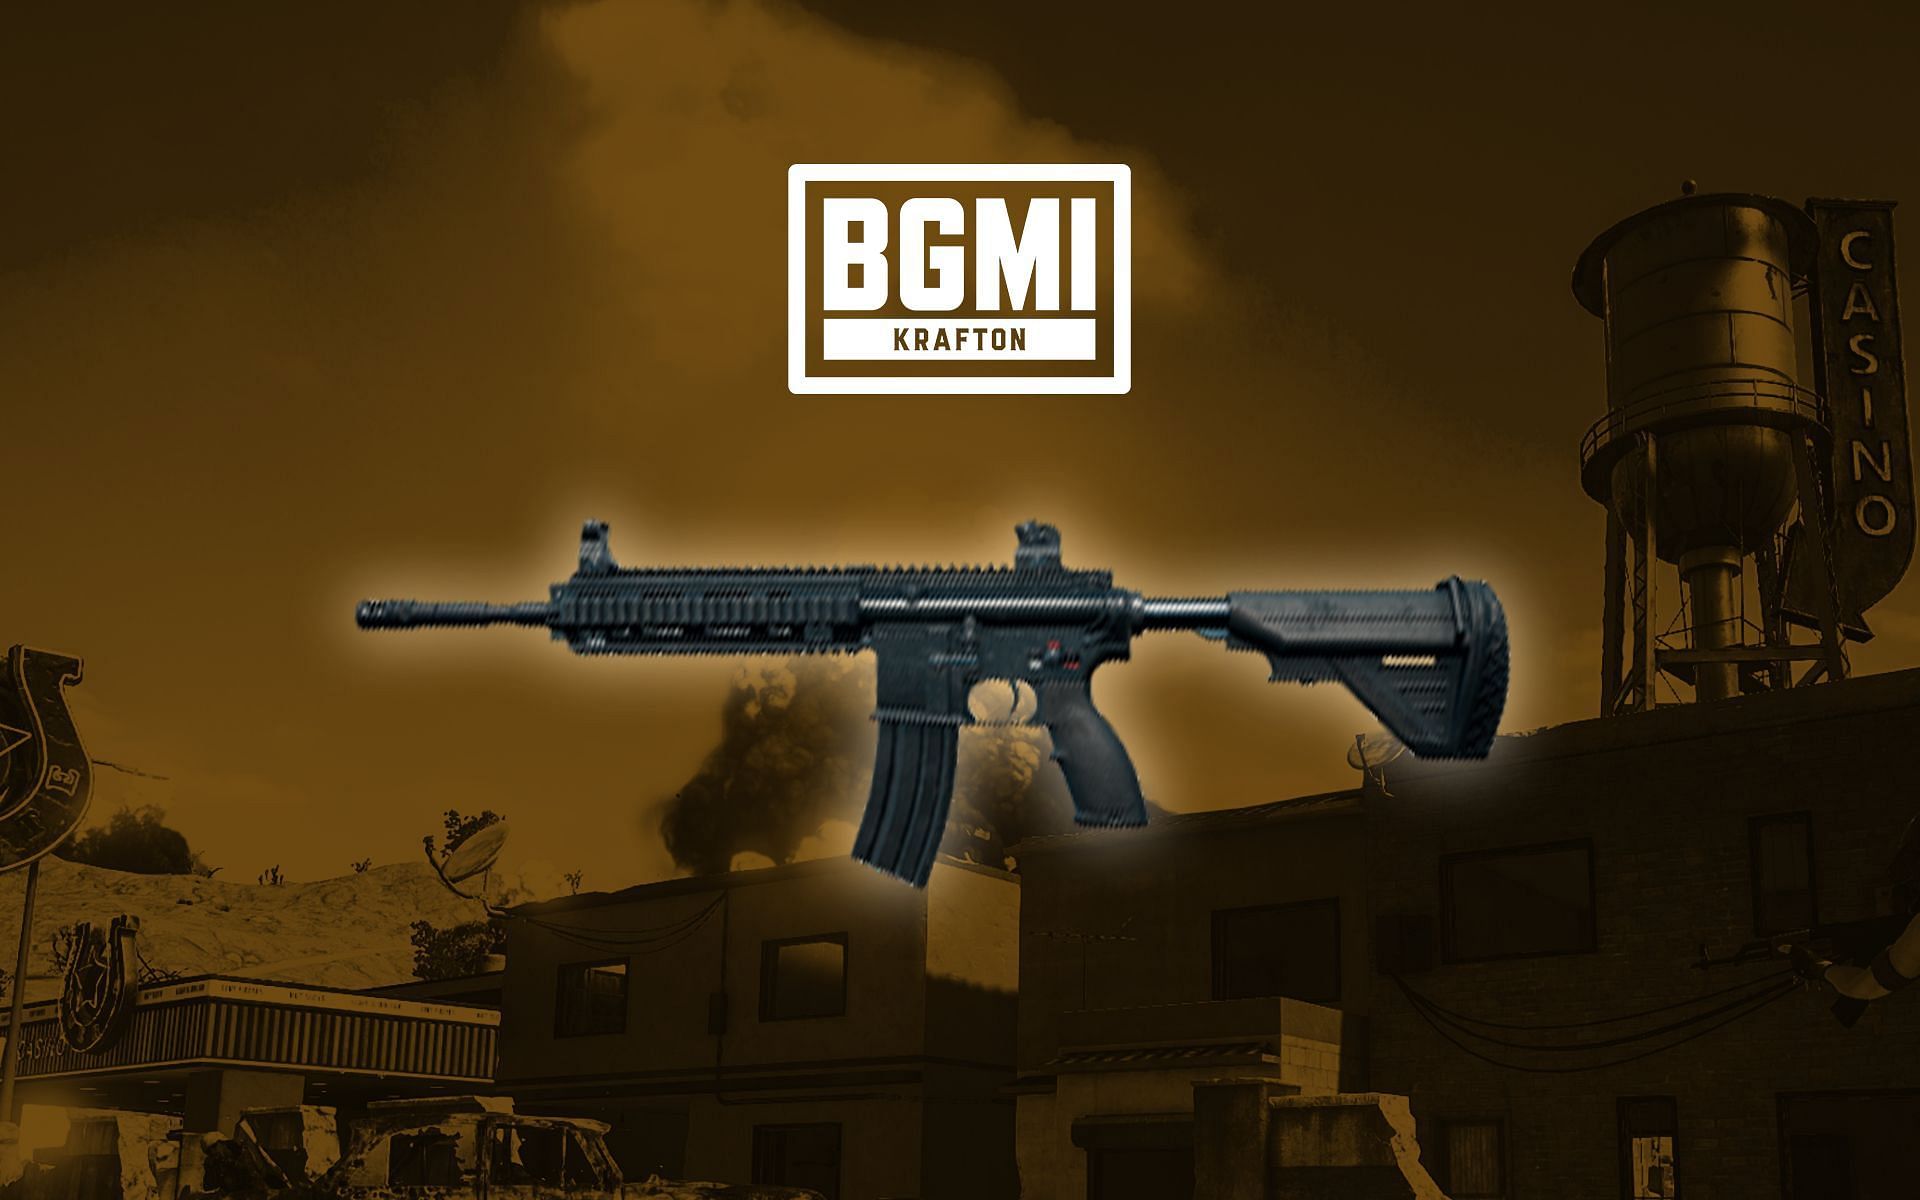 The M416 does not have the highest damage in BGMI (Image via Sportskeeda)